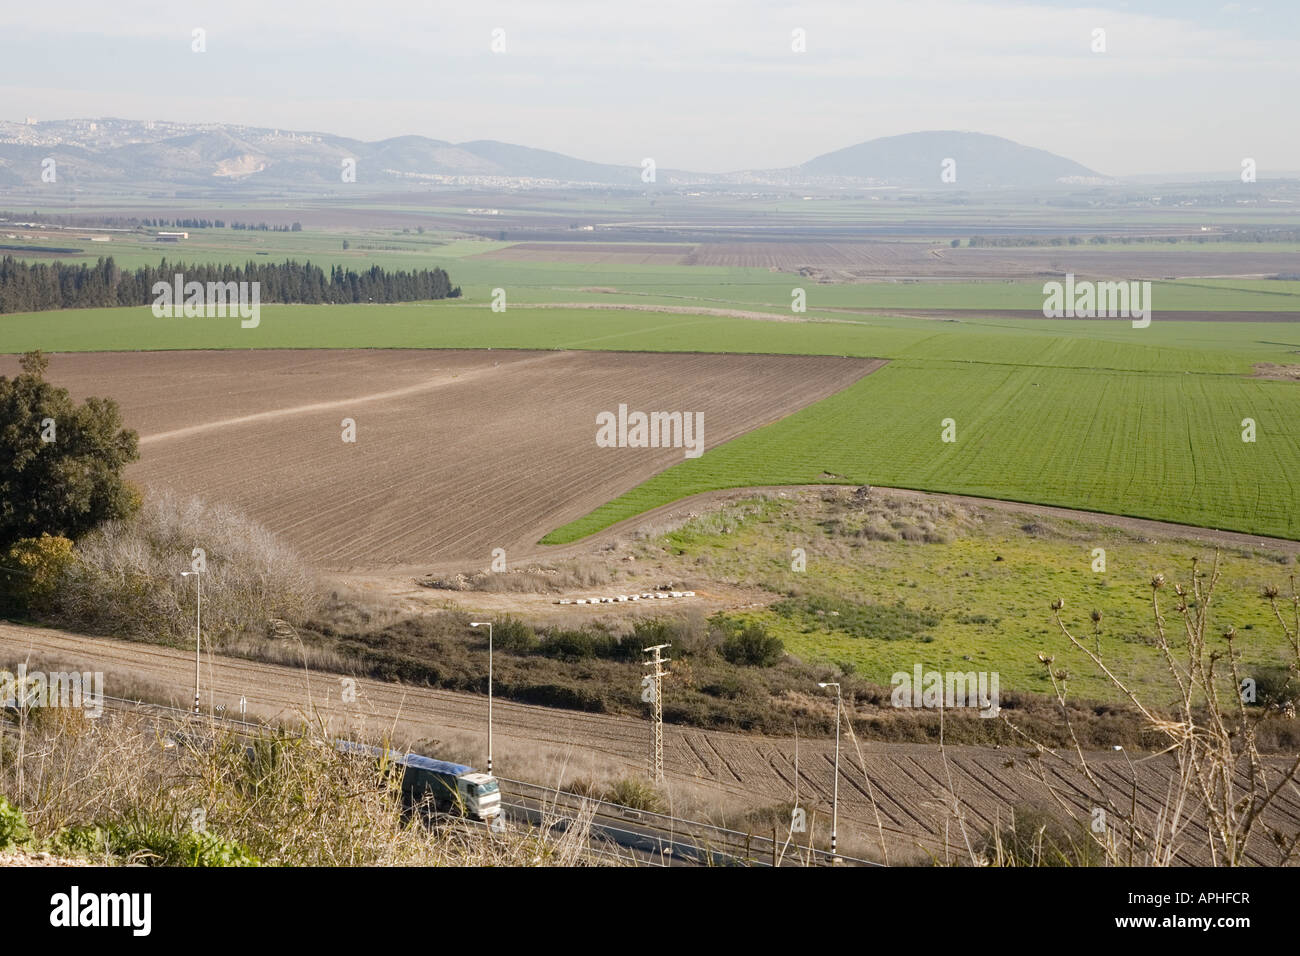 Stock photo of the Jezreel Valley Northern Israel Stock Photo